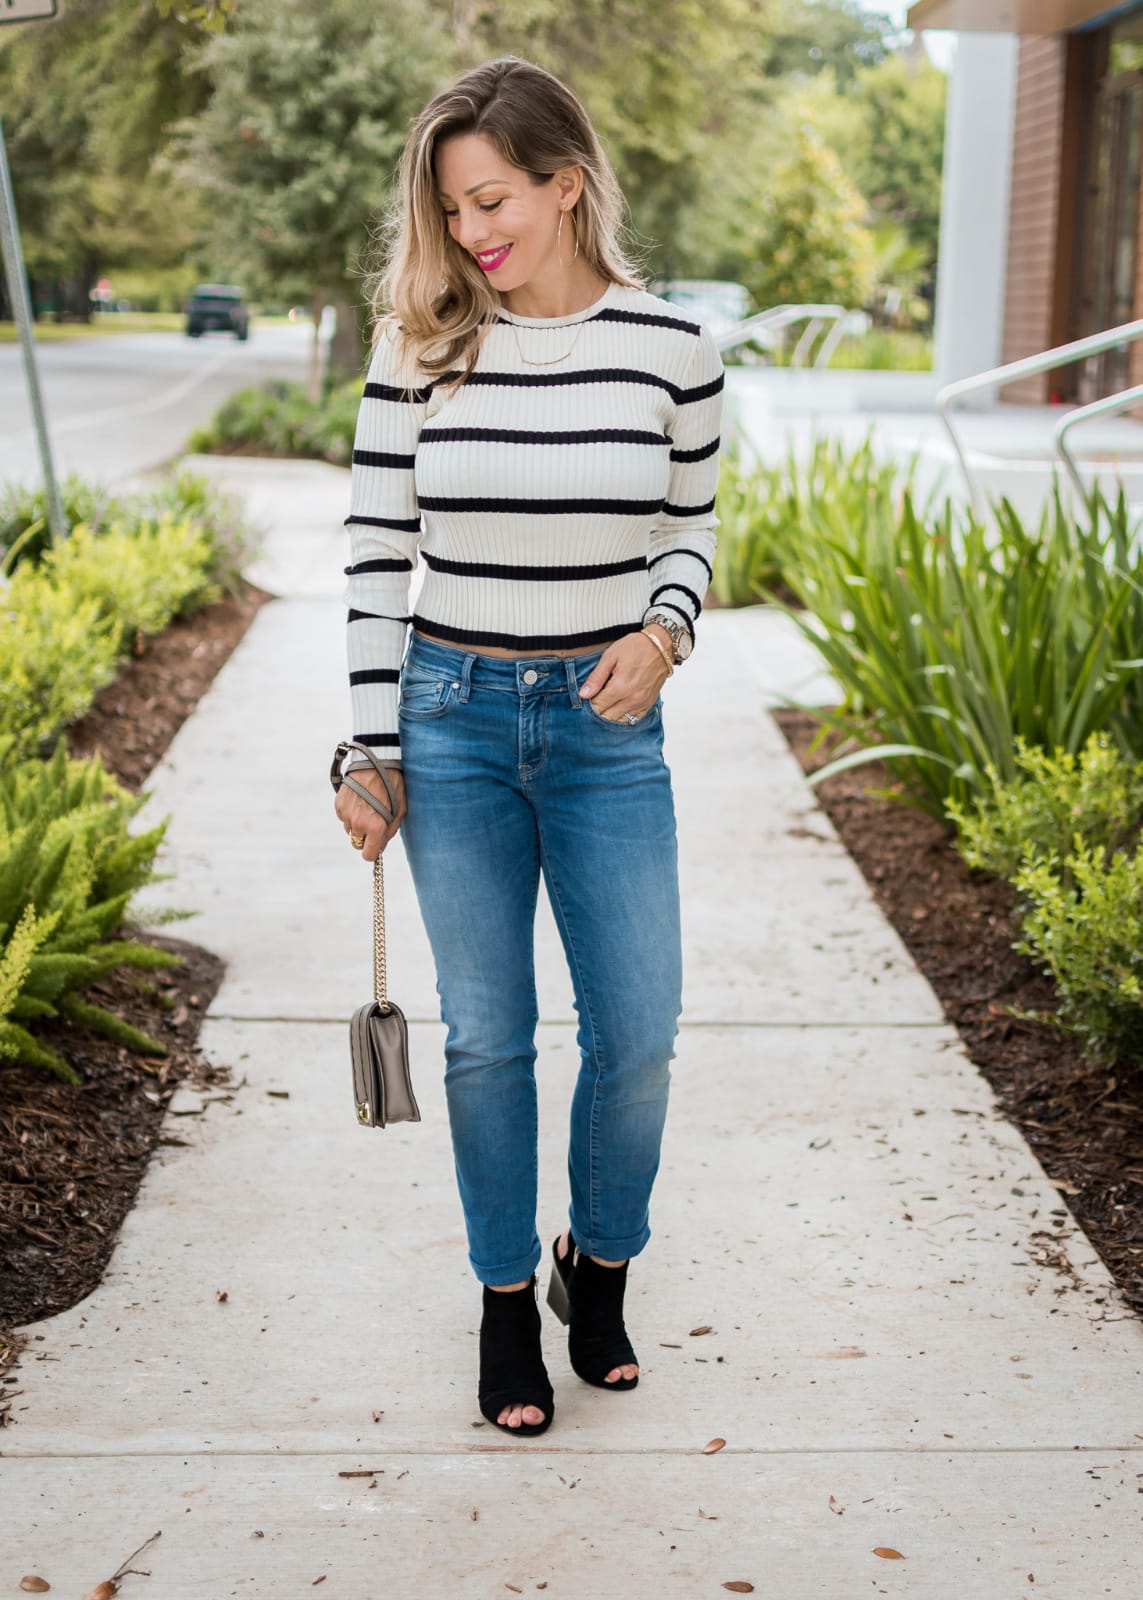 how to wear boyfriend jeans cute fall outfit